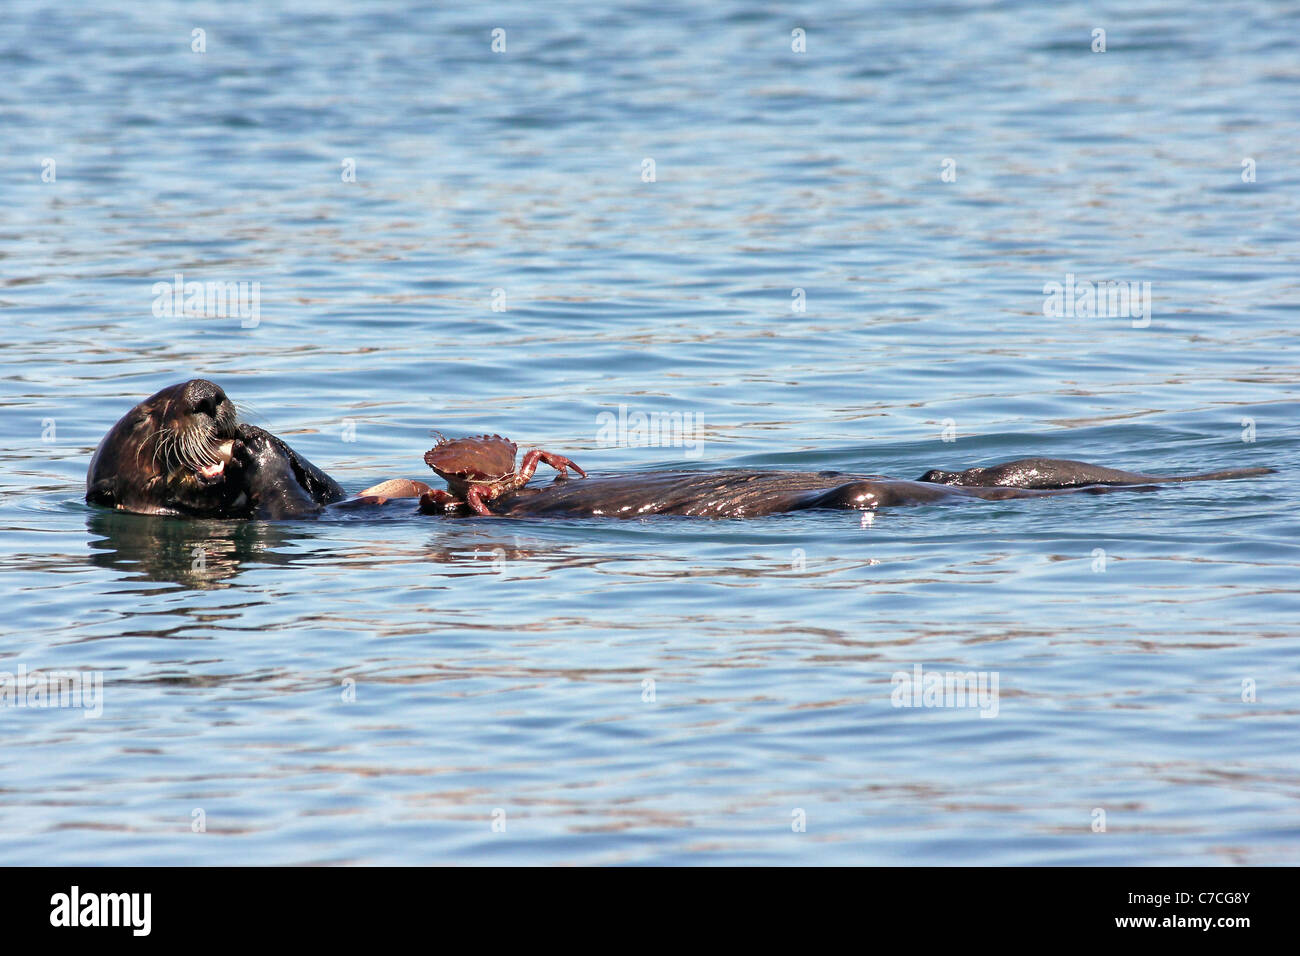 An Endangered Sea Otter (Enhydra lutris nereis) Eats a Crab in the Waters of California Stock Photo